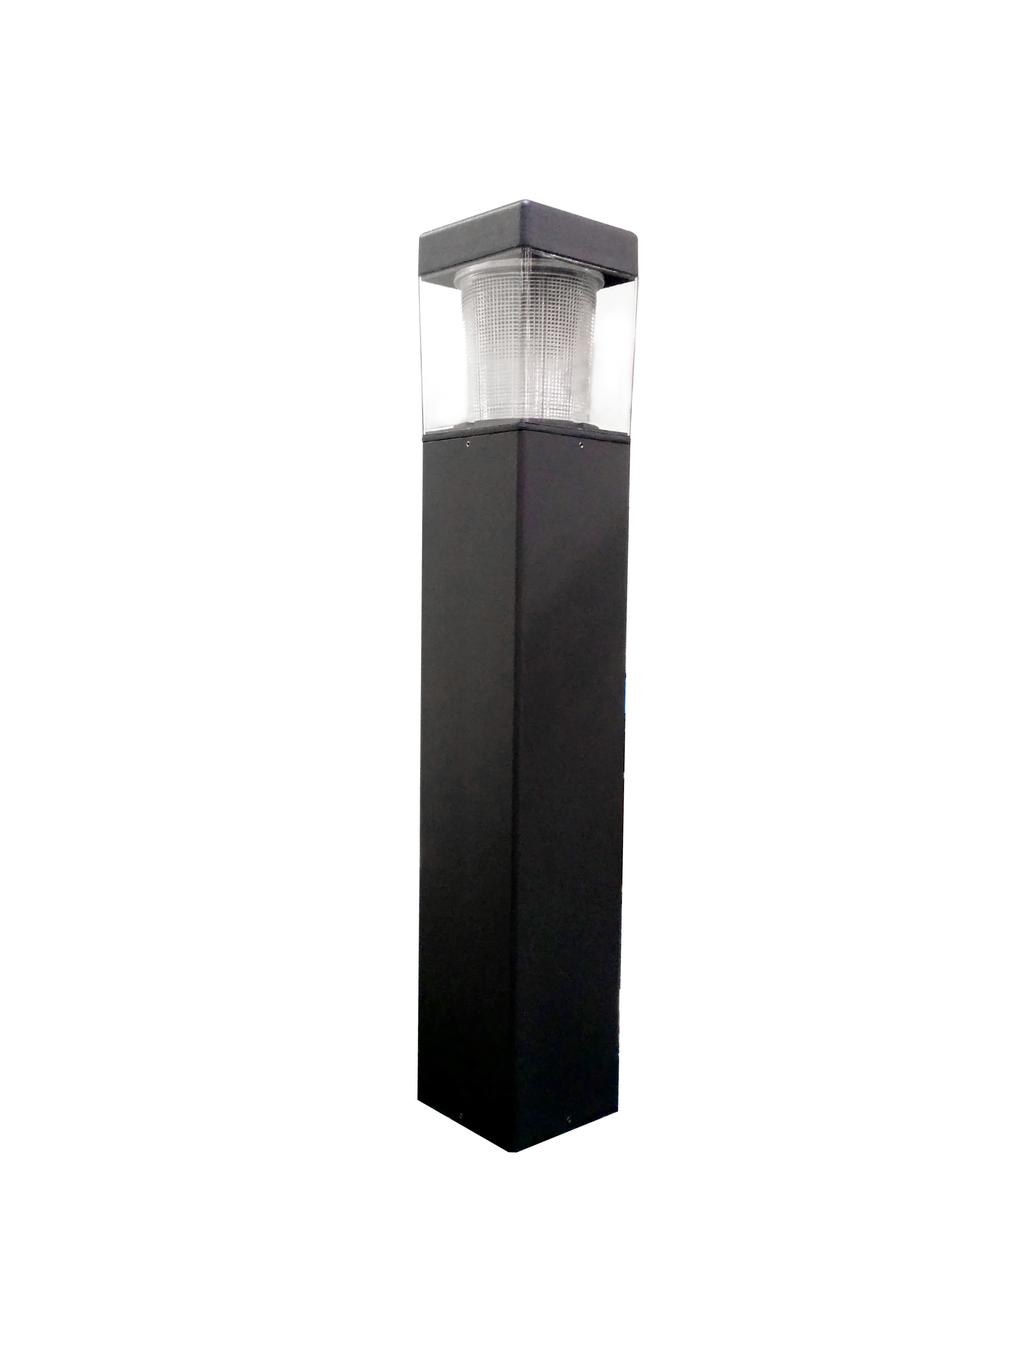 Product Information The Bollard.S is a distinctive ground LED lighting fixture. This durable fixture is designed to deliver clear illumination.